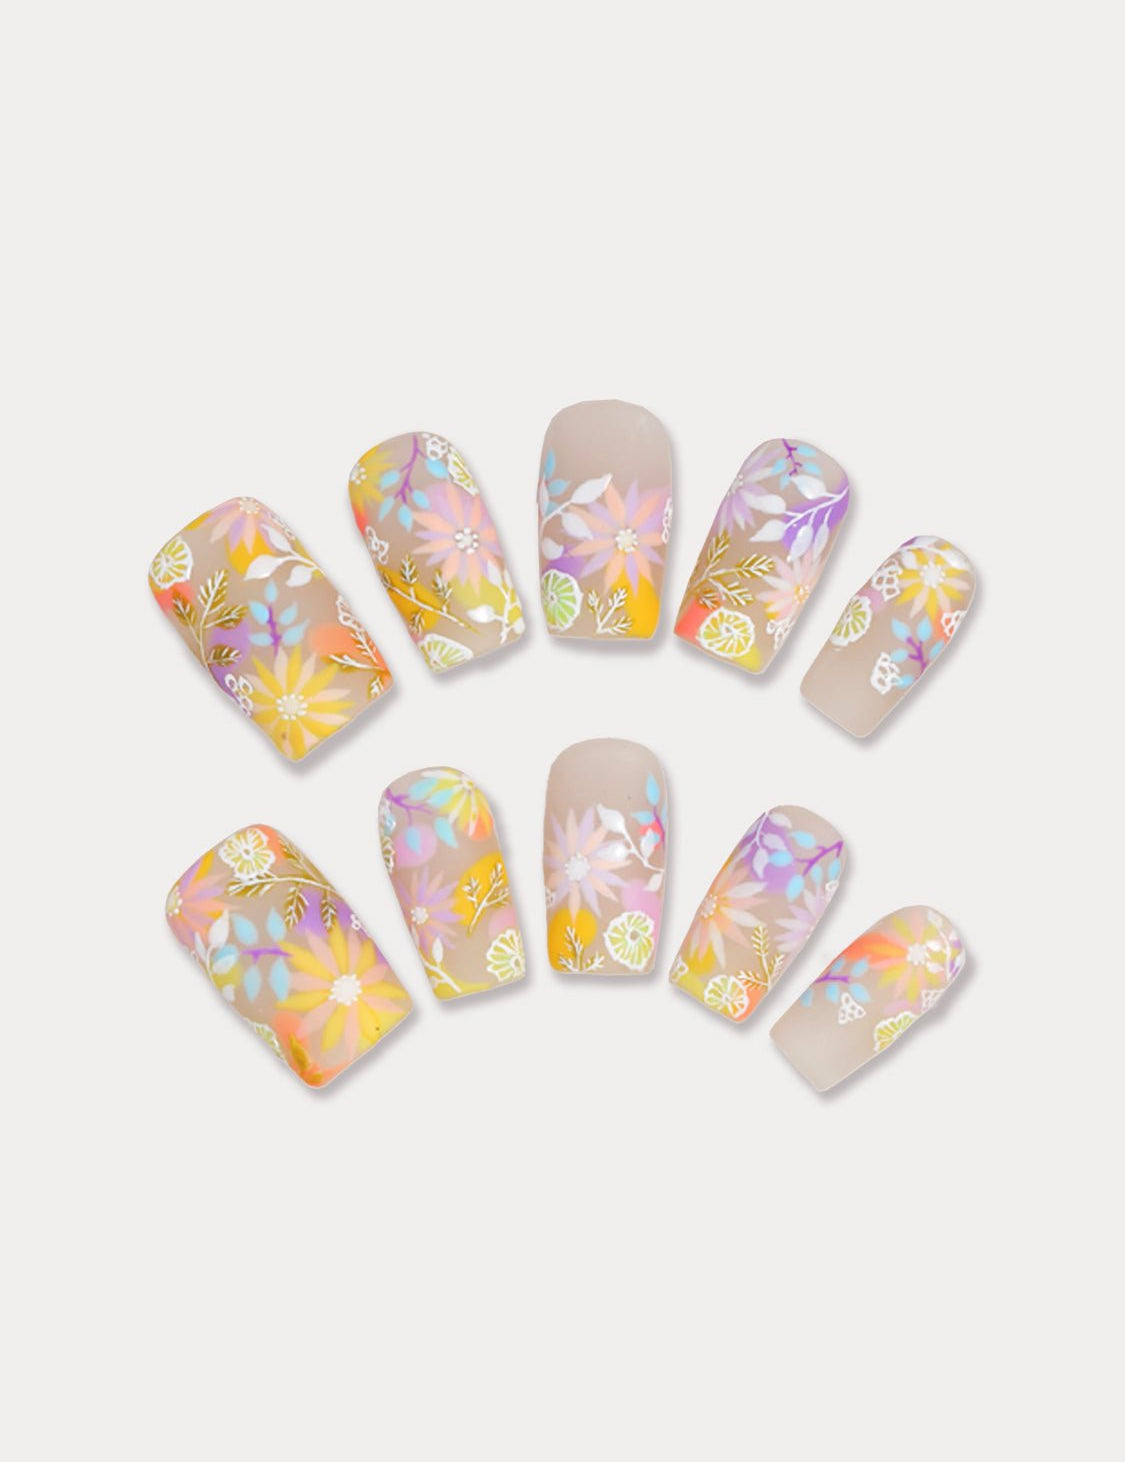 MIEAP Colorful Flower press on nail set captures the essence of blooming flowers in vibrant hues. The bold and vivid colors go beyond the delicate sprouts of spring, exuding the energetic and passionate ambiance of summer. #MIEAP #MIEAPnails #pressonnail #falsenail #acrylicnail #nails #nailart #naildesign #nailinspo #handmadenail #summernail #nail2023 #graduationnail #luxurynail #shortnail #squarenail #colorfulnail #floralnail #datingnail #promnail